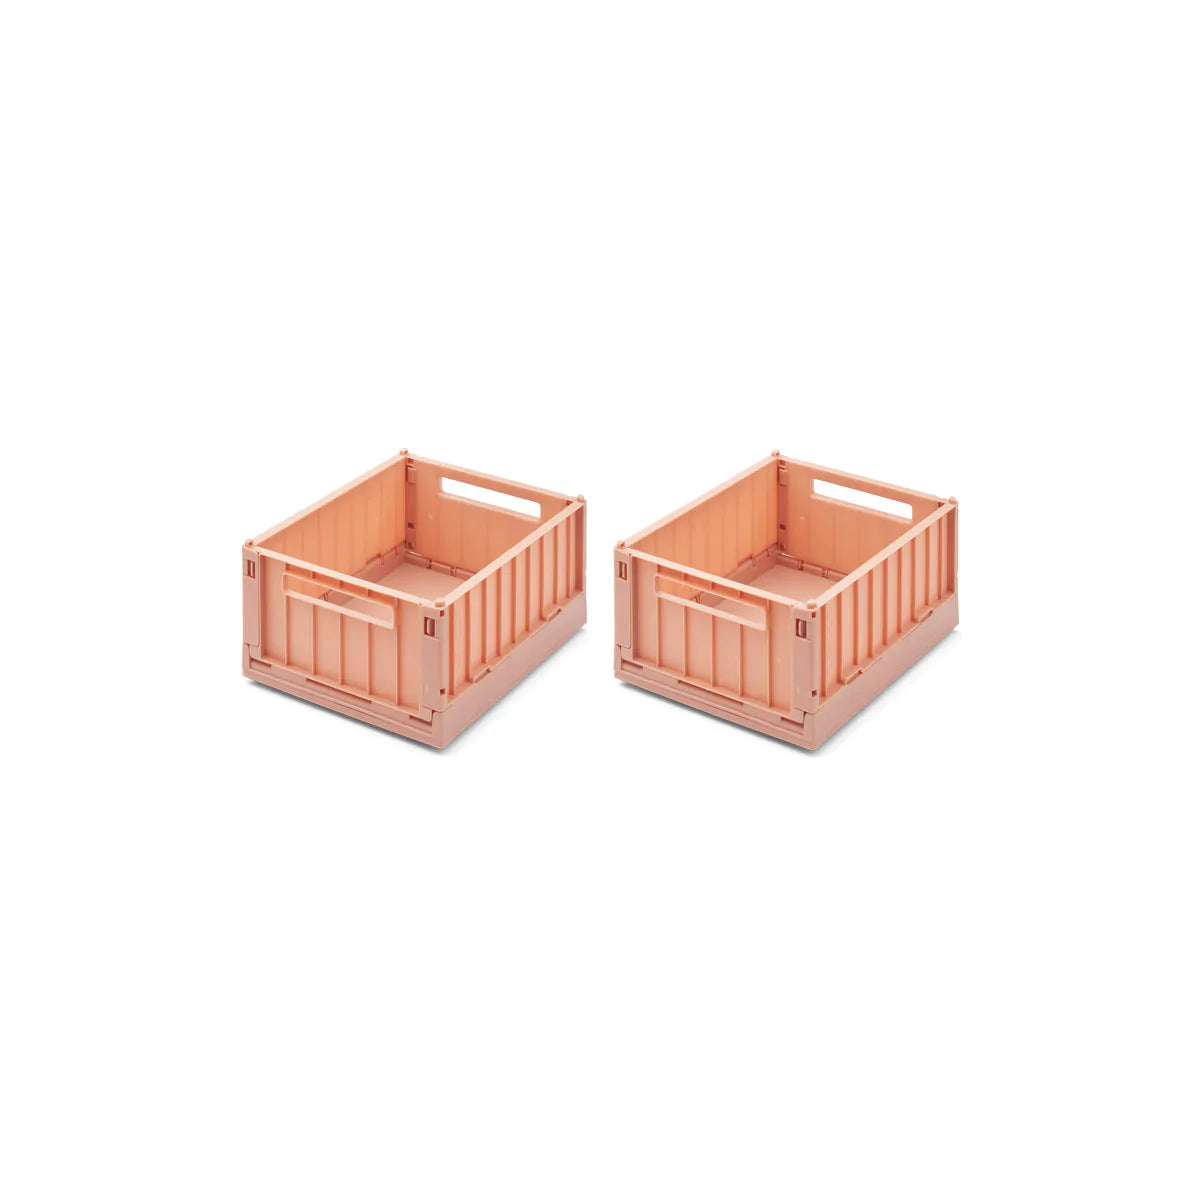 Weston Storage Box (Small) With Lid - 2 pack